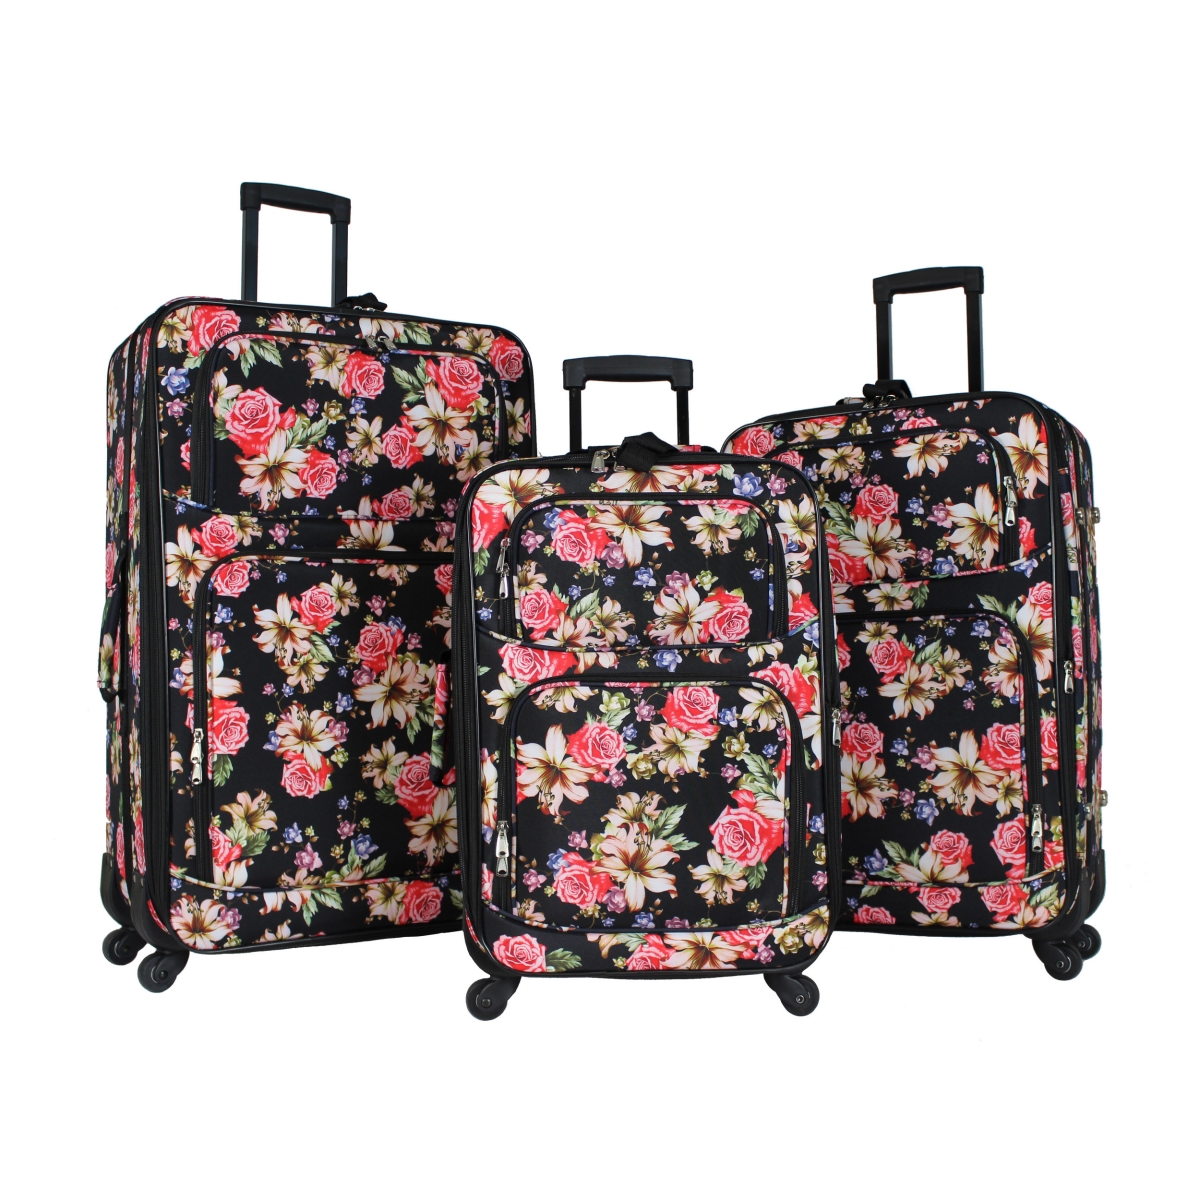 818703-203 Rolling Expandable Spinner Luggage Set - Rose Lily, 3 Piece